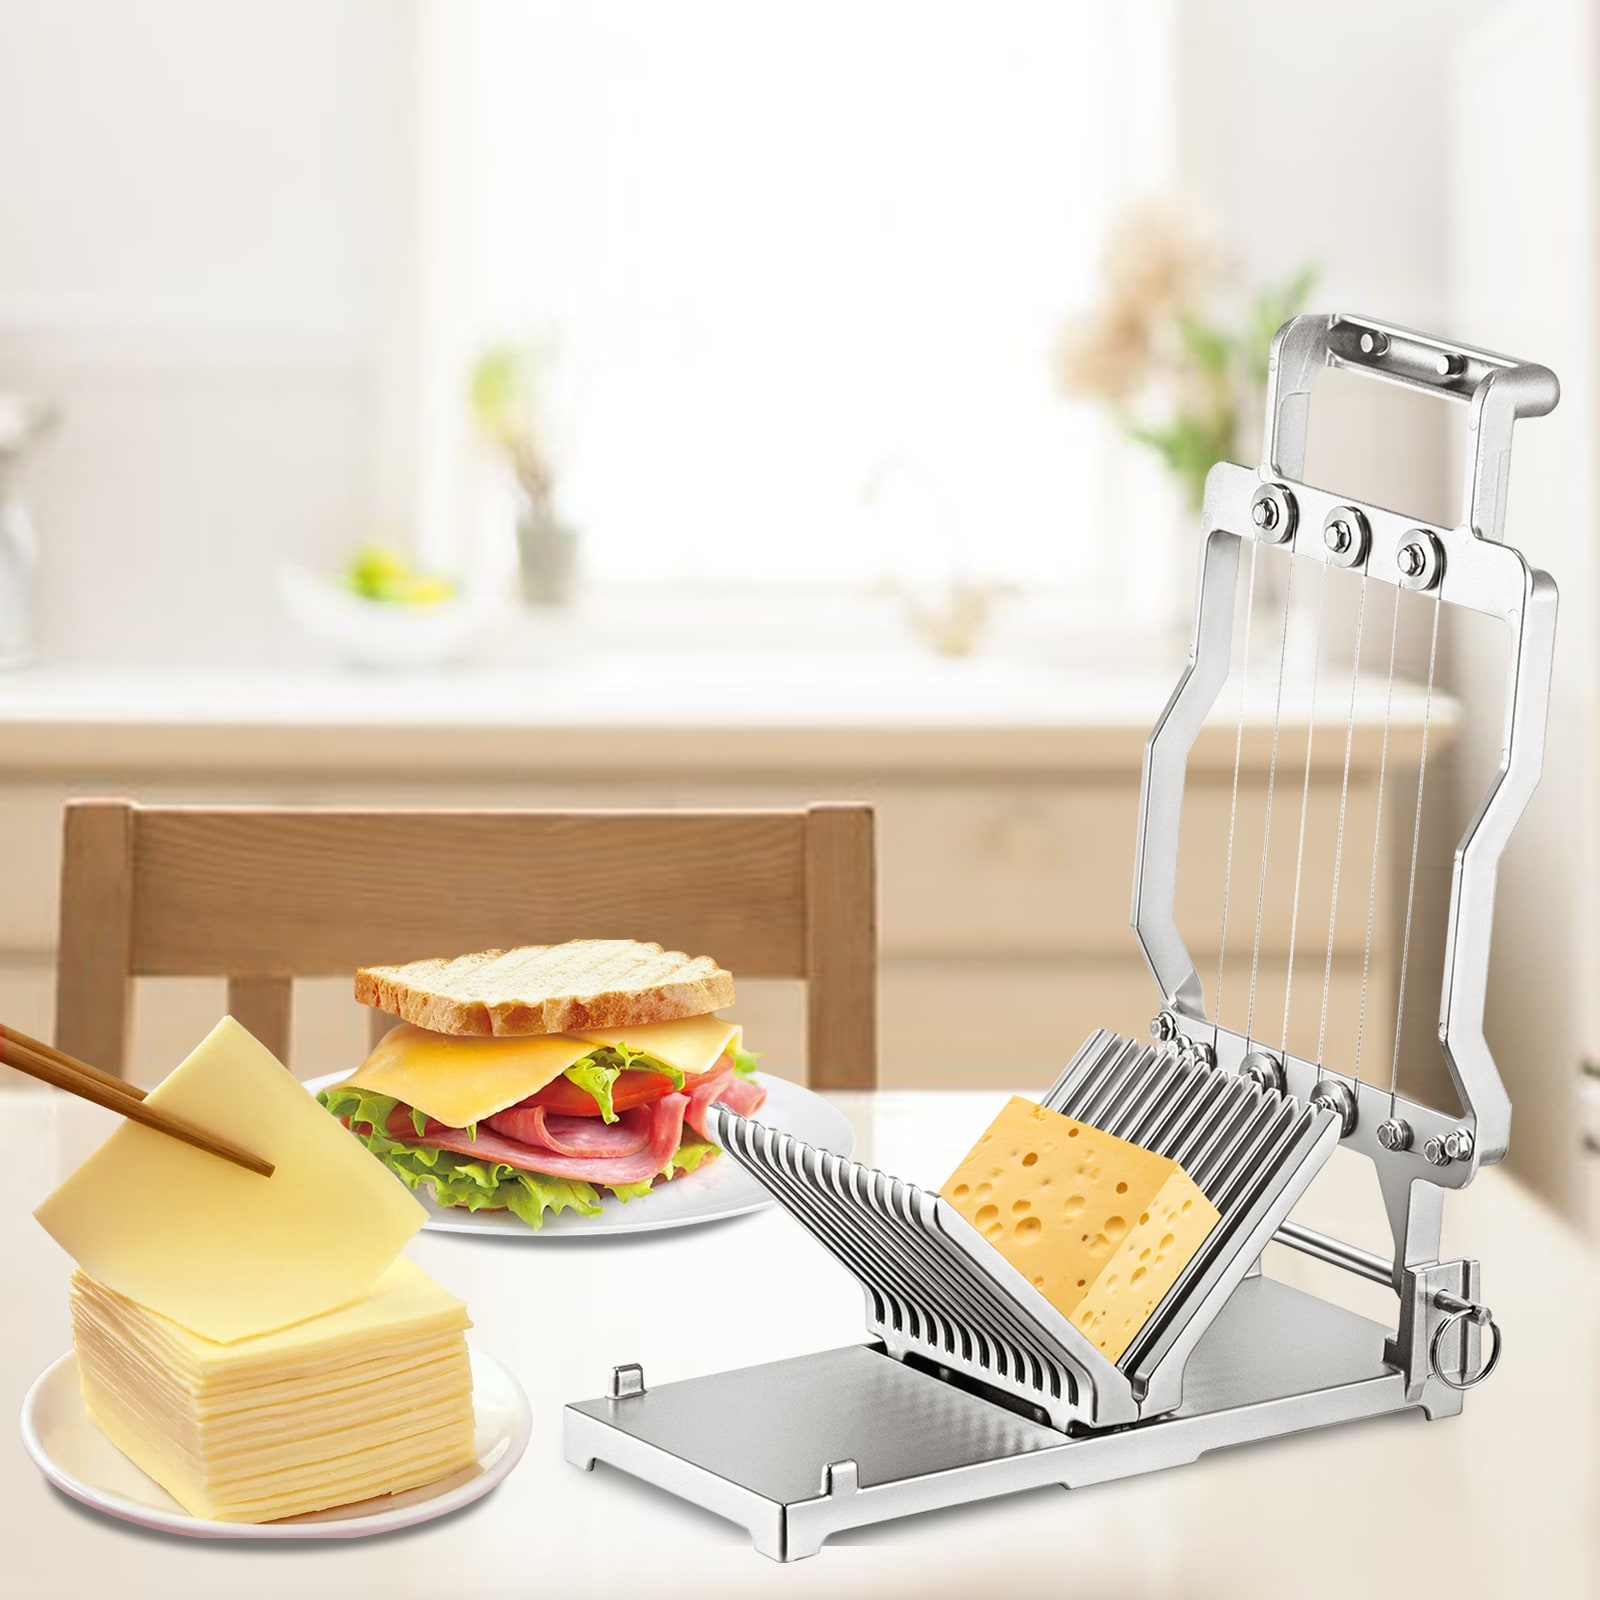 https://ak1.ostkcdn.com/images/products/is/images/direct/4151467e5ef06e96211f67dd1726f99442a85092/VEVOR-Cheese-Cutter-With-Wire-1-cm-%26-2-cm-Cheeser-Butter-Cutting-Blade-Replaceable-Cheese-Slicer-Wire.jpg